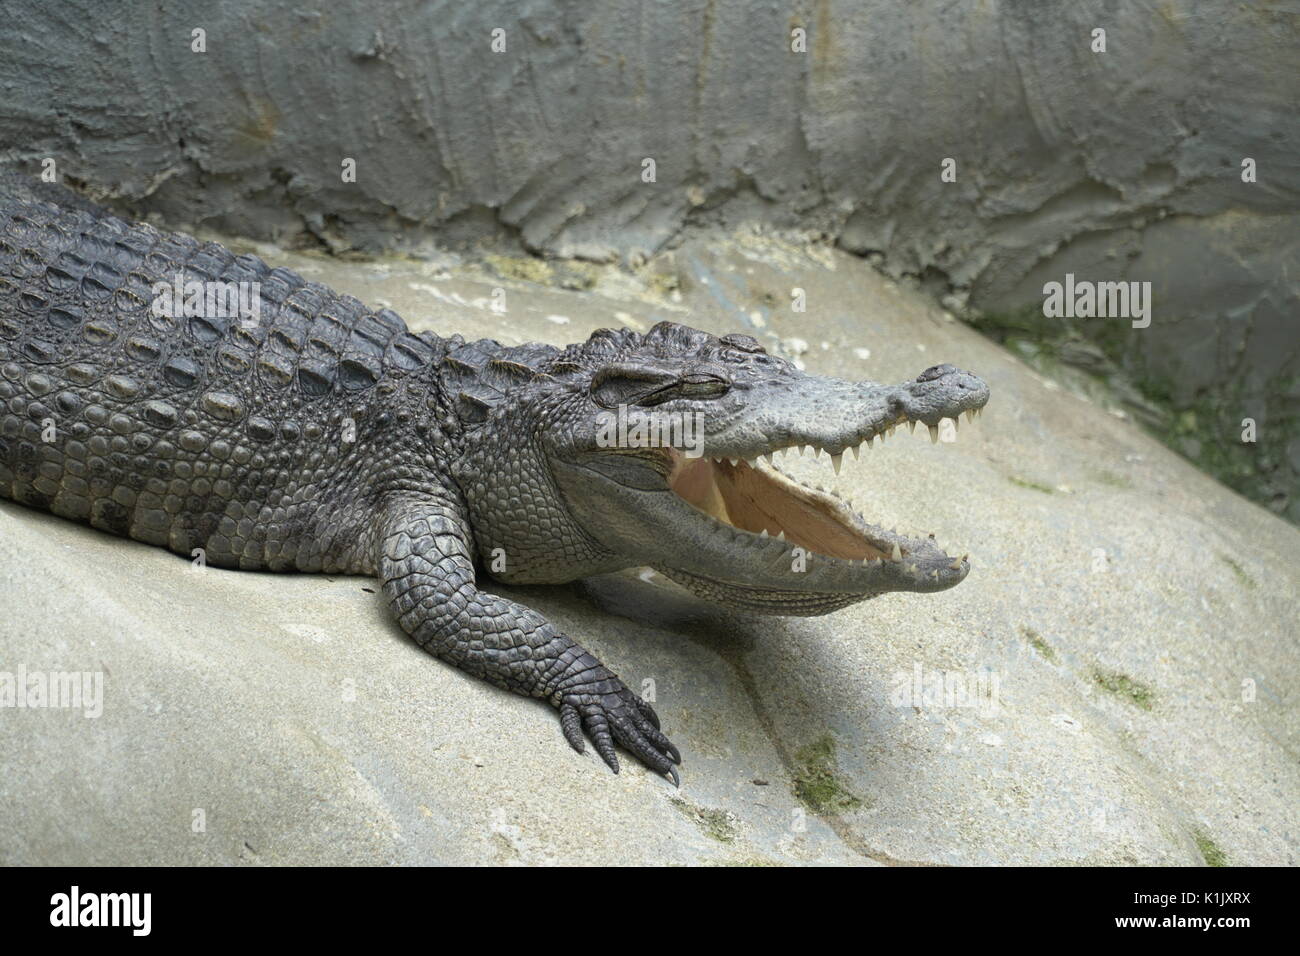 Image of a Crocodile opened mouth and closed eye Resting In A Crocodiles Farm Stock Photo